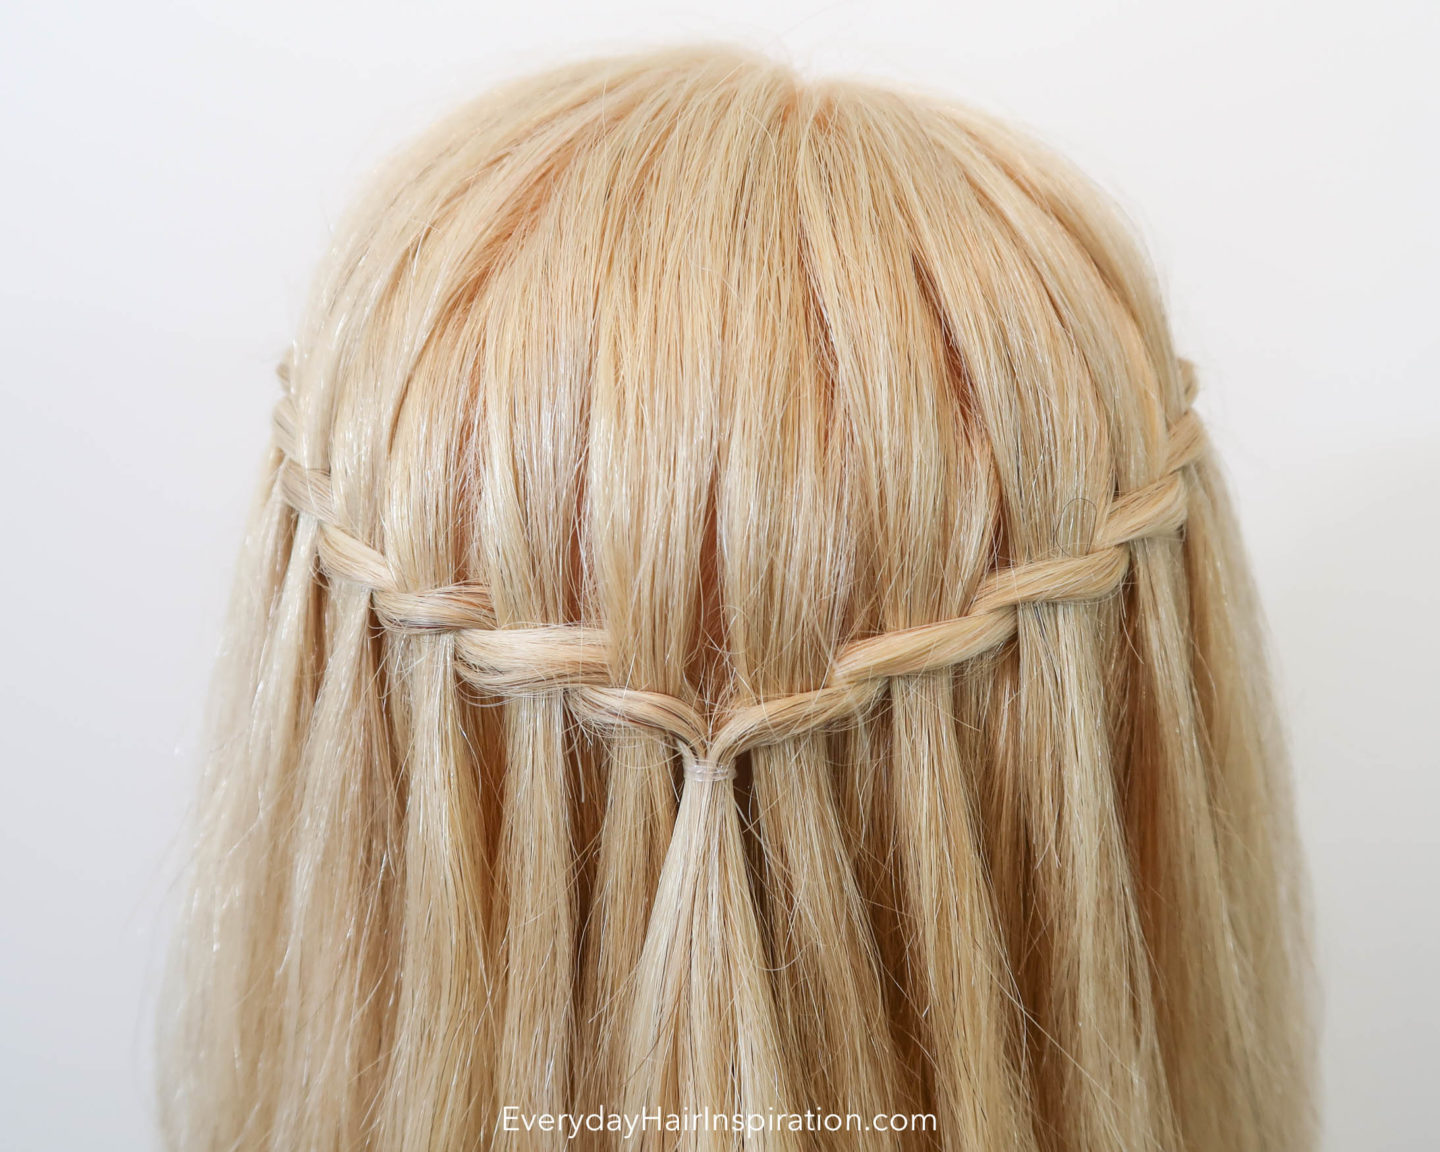 Blonde Hairdresser doll with a twisted waterfall braid in the hair, closeup seen from the back 